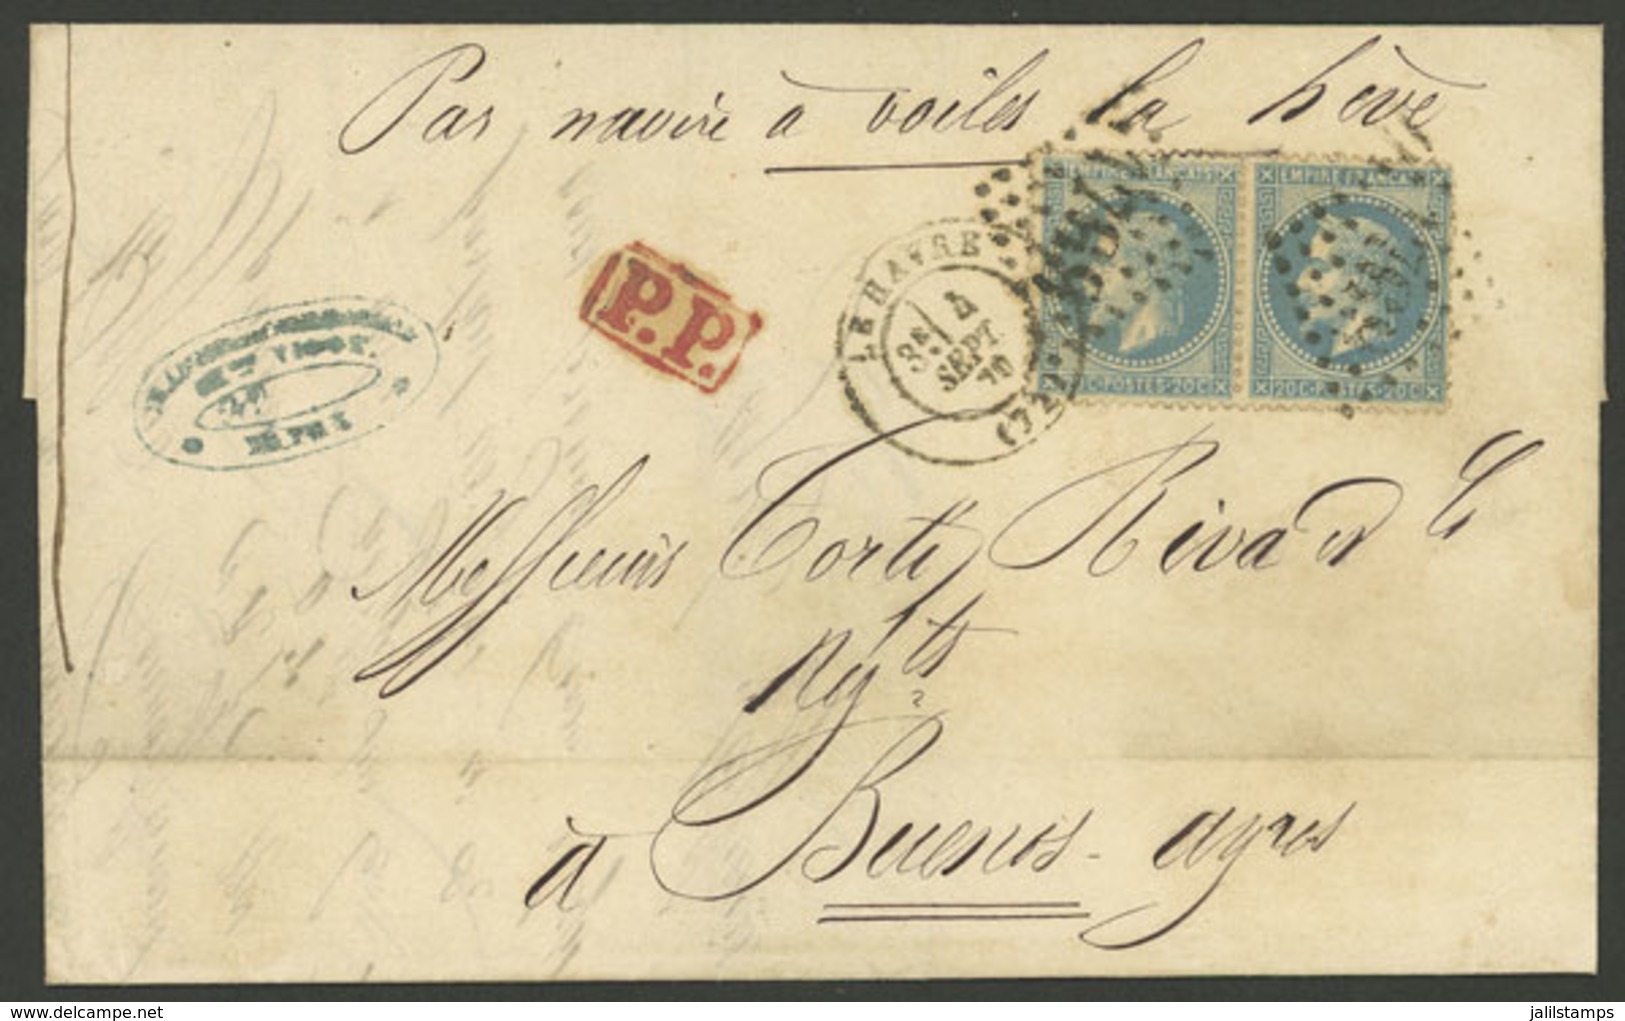 FRANCE: 4/SE/1870 Le Havre - Buenos Aires "by Sailing Ship From Le Havre", Folded Cover Franked With 40c. (pair 20c. Nap - 1863-1870 Napoleon III With Laurels